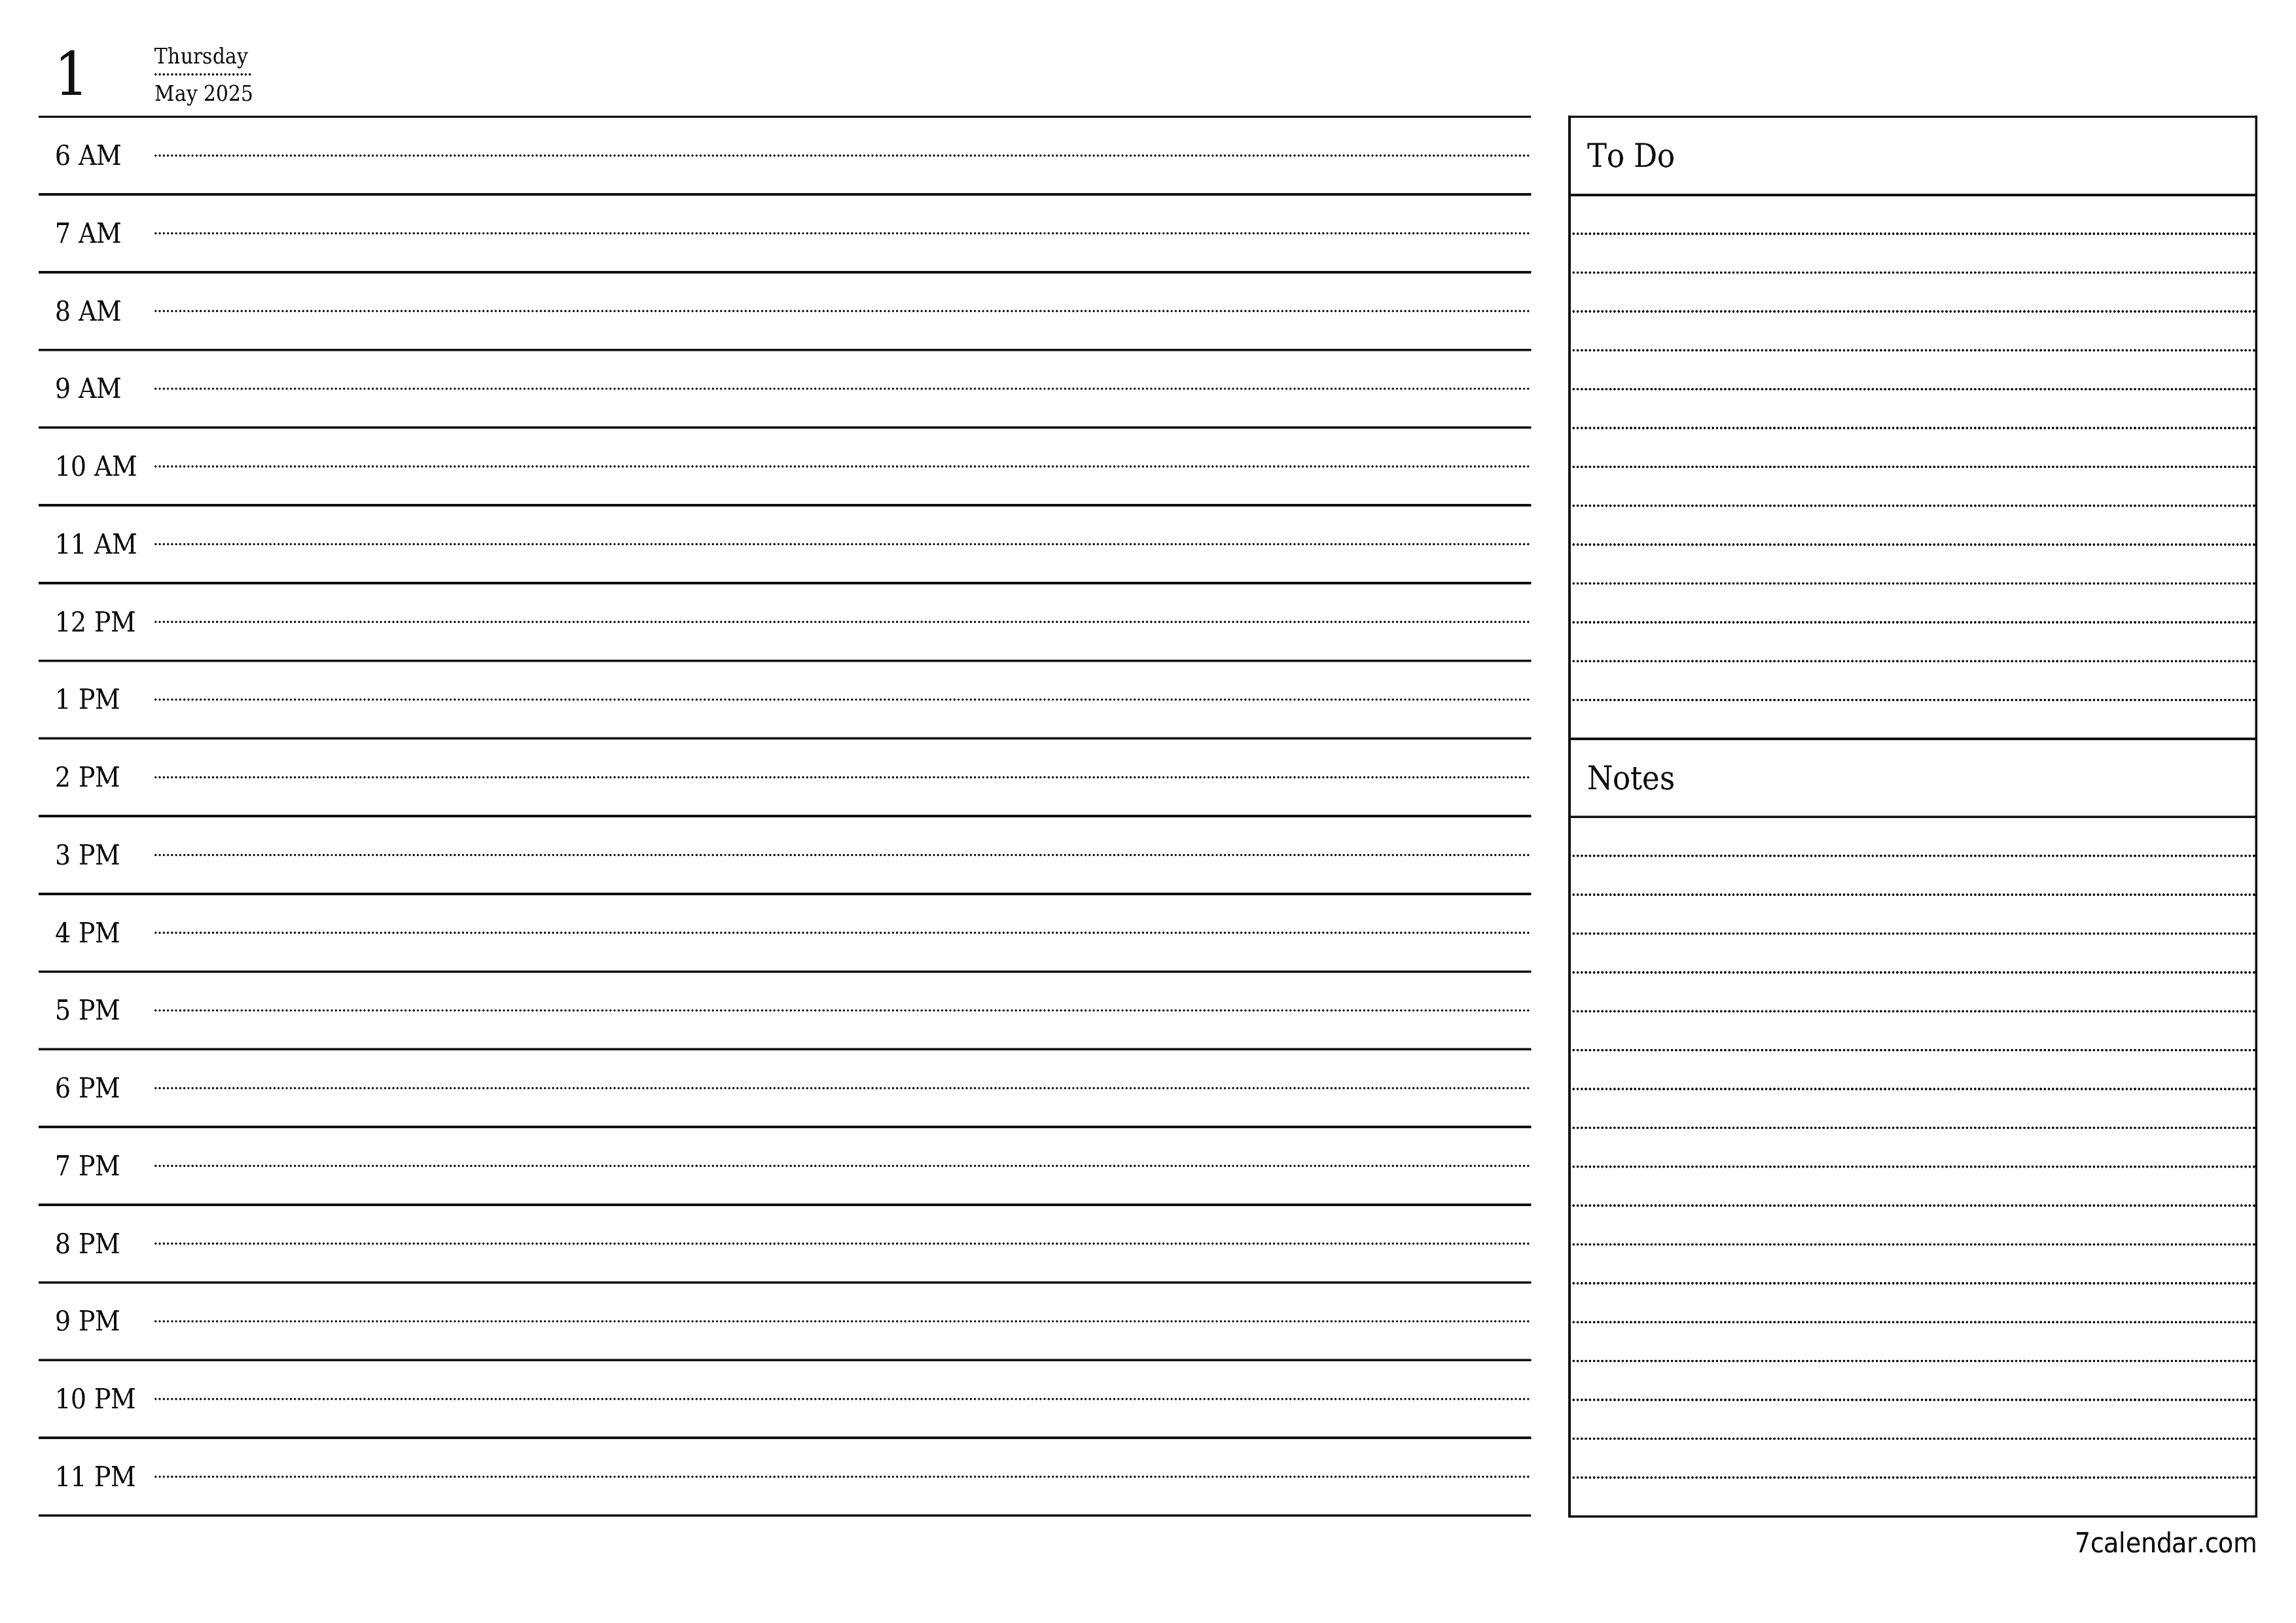 Blank daily printable calendar and planner for day May 2025 with notes, save and print to PDF PNG English